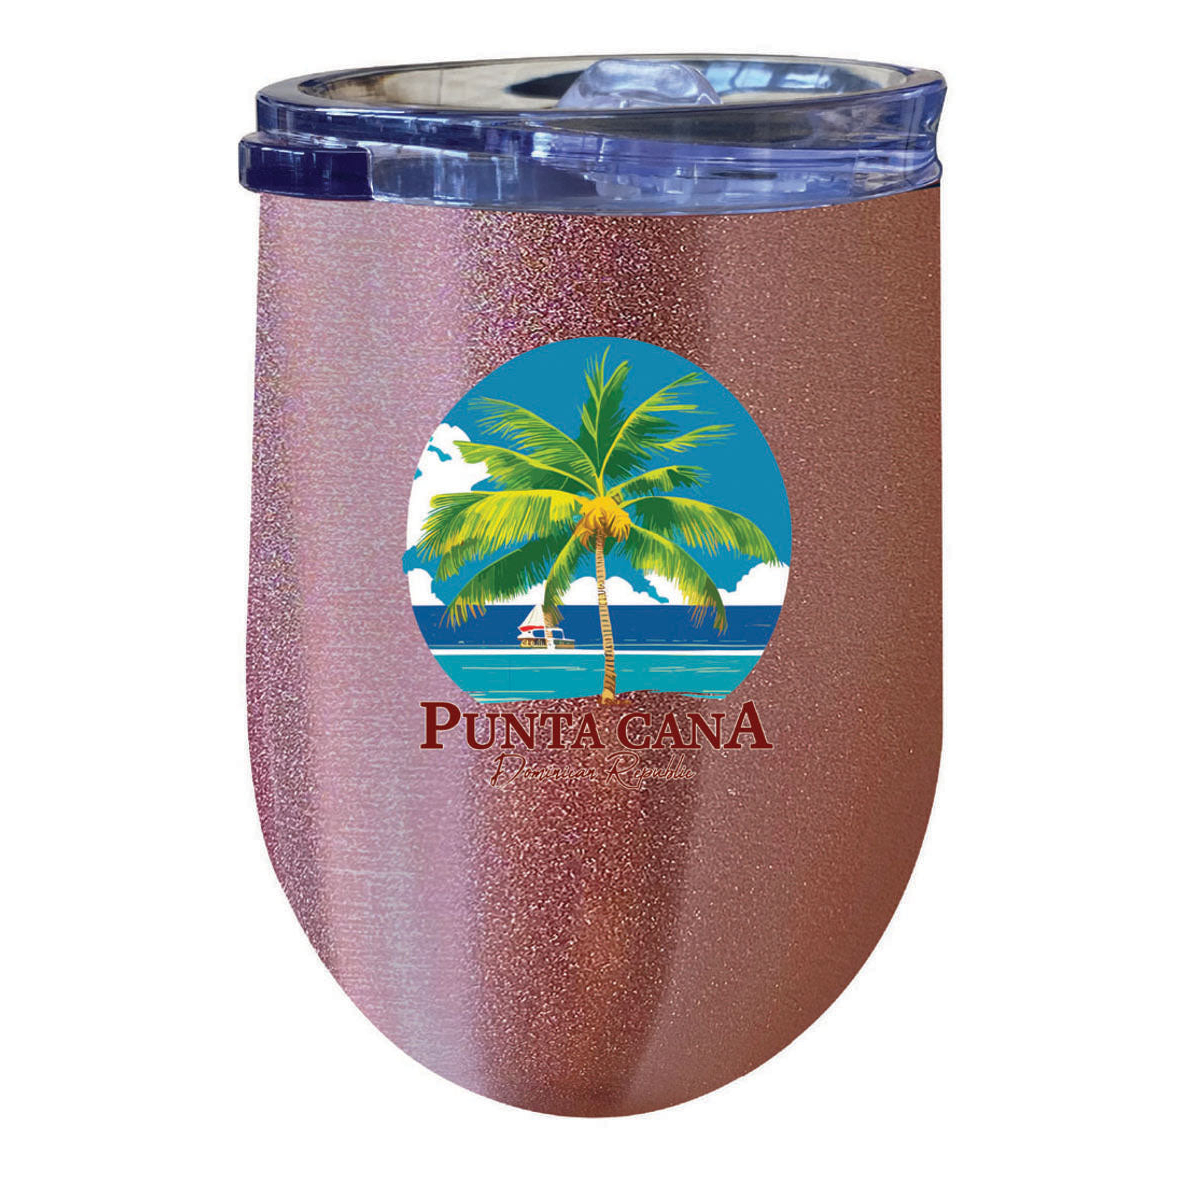 Punta Cana Dominican Republic Souvenir 12 Oz Insulated Wine Stainless Steel Tumbler - Black, PARROT B